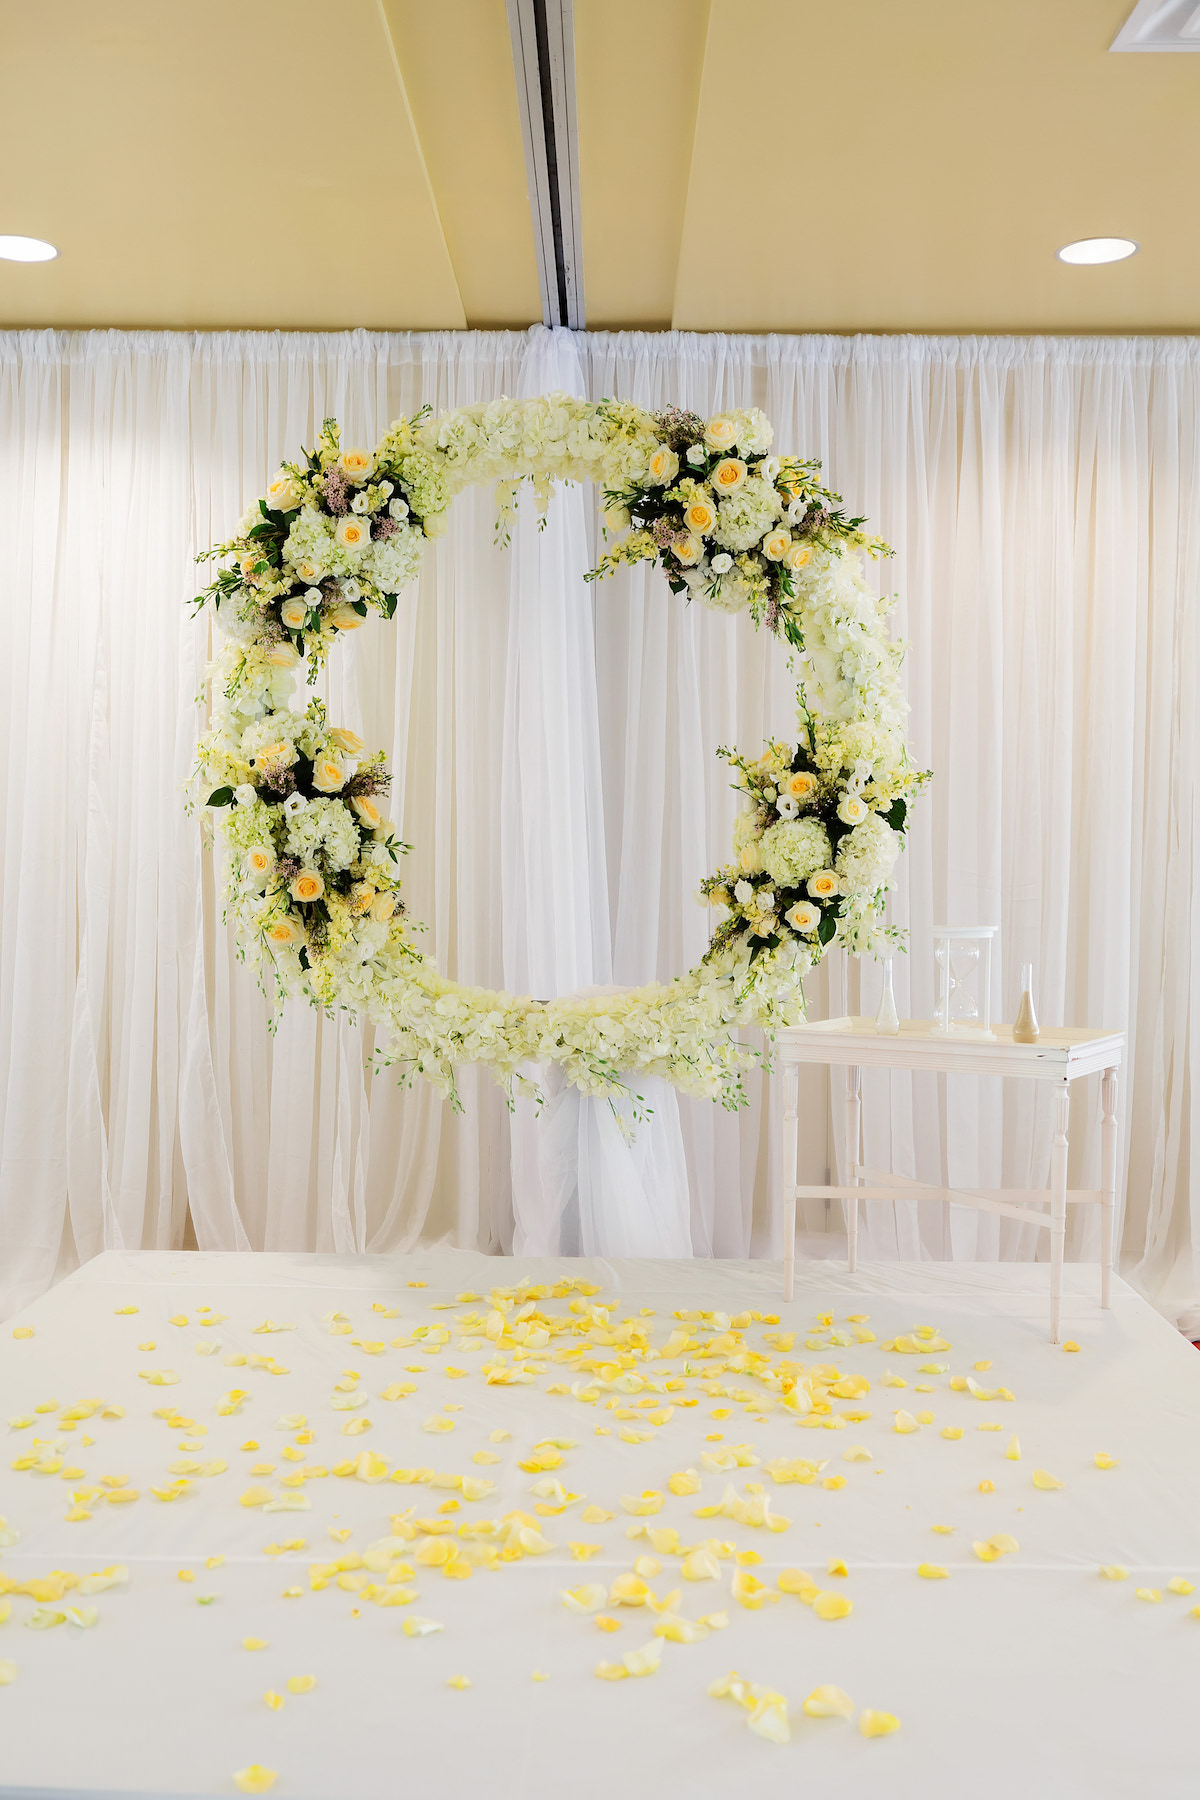 Romantic Classic White Hydrangeas, Rose Petals, Roses, Yellow Florals in Circular Wreath | Tampa Bay Wedding Planner Special Moments Event Planning